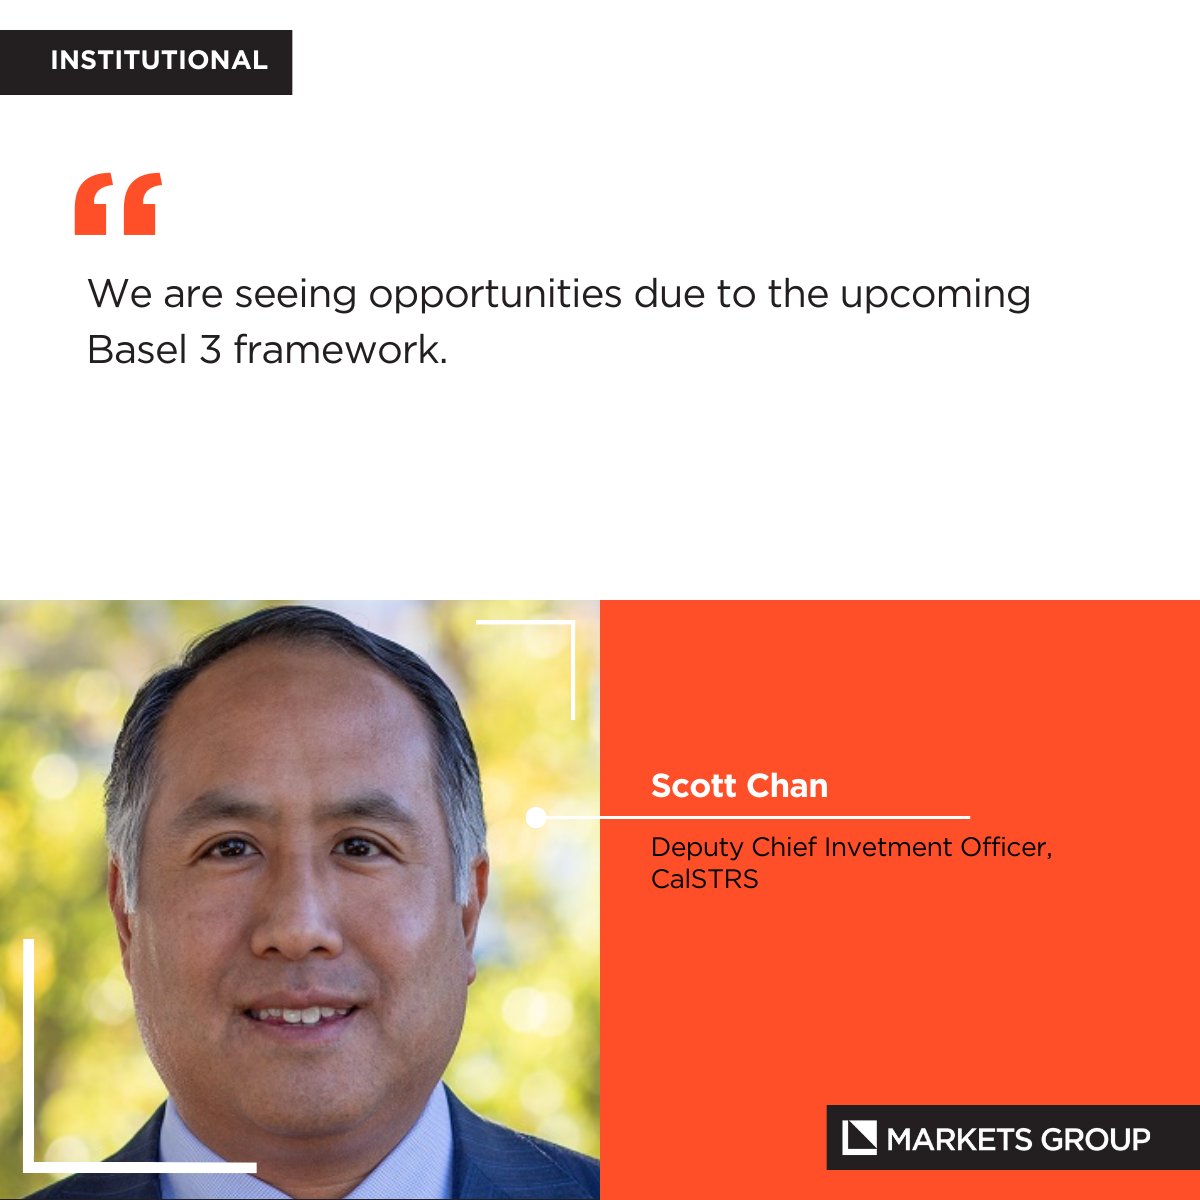 Curious about the future of investments? Scott Chan, Deputy Chief Investment Officer at CalSTRS, shares insights on how they're capitalizing on upcoming changes in the Basel 3 framework.

@calstrs

📰 Read more: marketsgroup.org/news/CalSTRS-S…

#marketsgroupnews